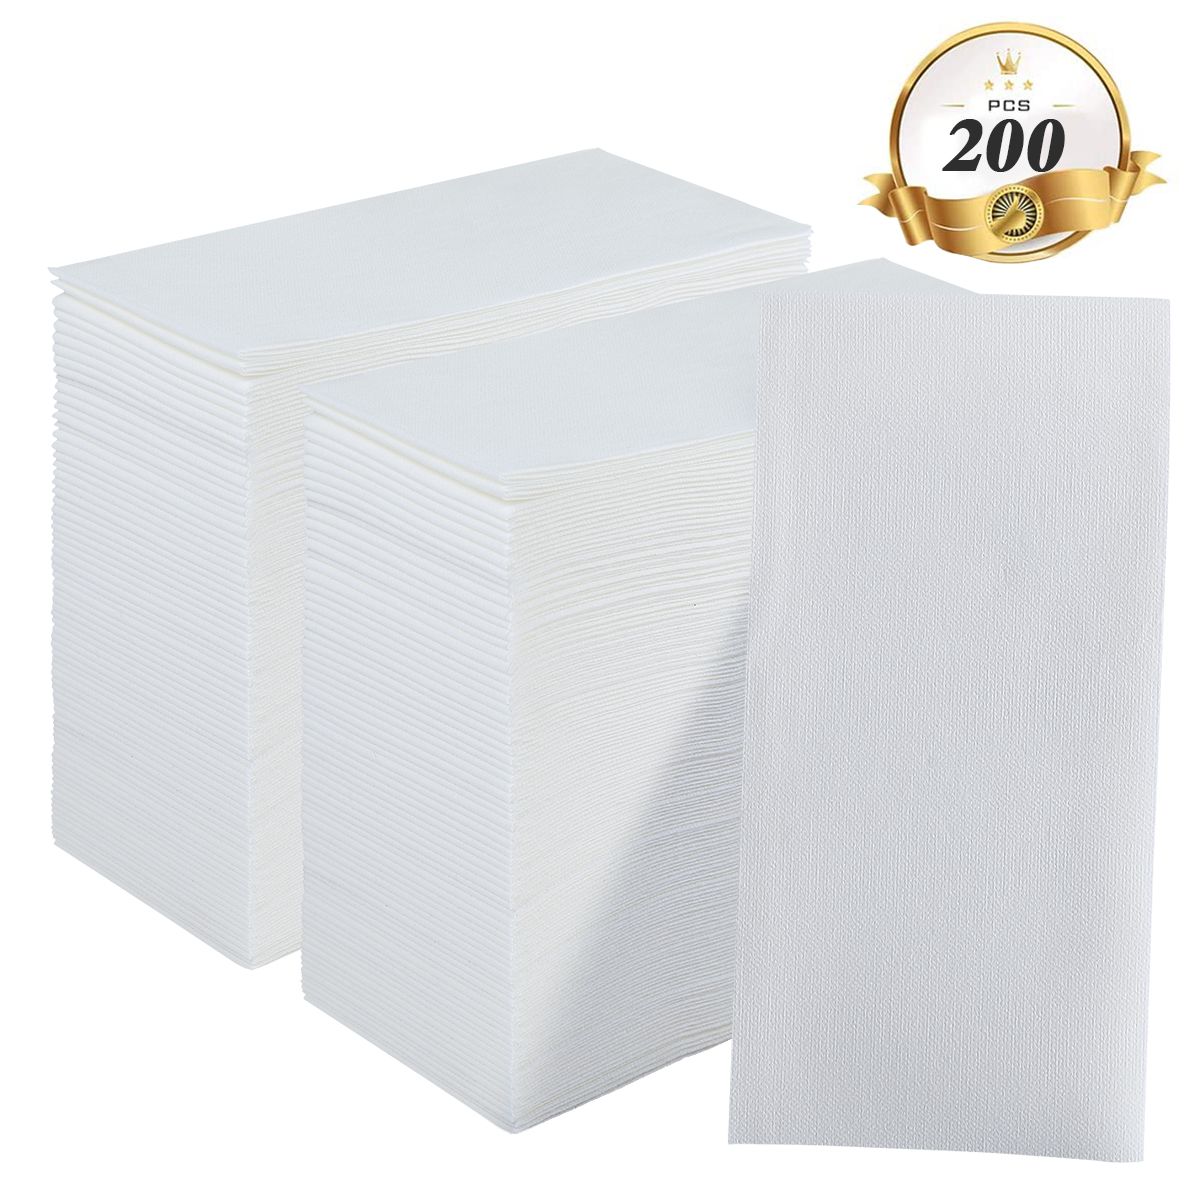 Bathroom,Weddings,Parties Silver and White Elegant Decorative Paper Guest Towels for Kitchen Soft and Absorbent Line-Feel Dinner Napkin Jolly CHEF Disposable Hand Towels 